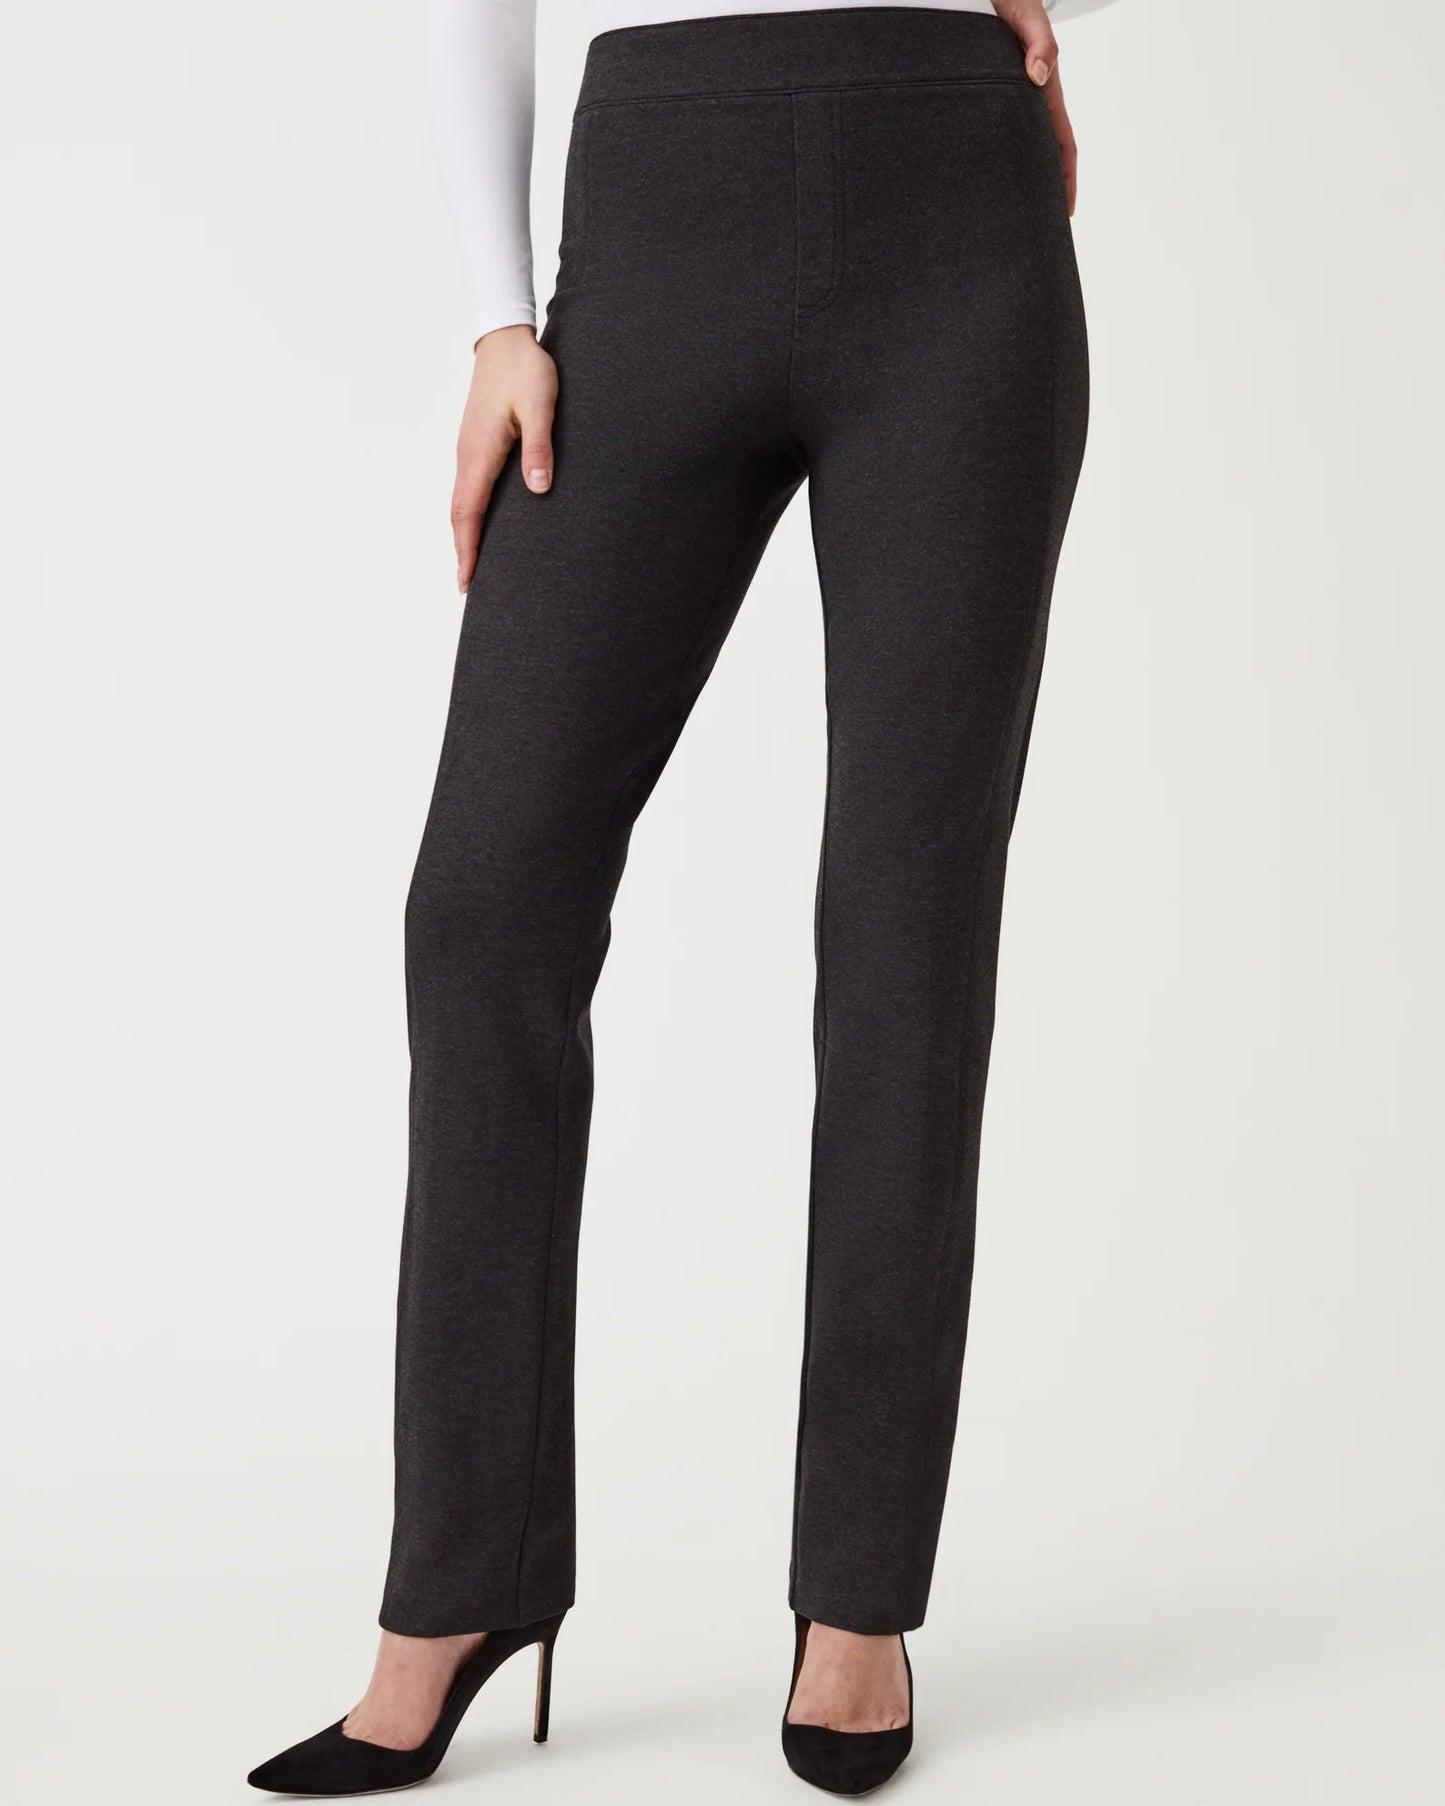 Spanx The Perfect Pant, Kick Flare In Houndstooth Jacquard in